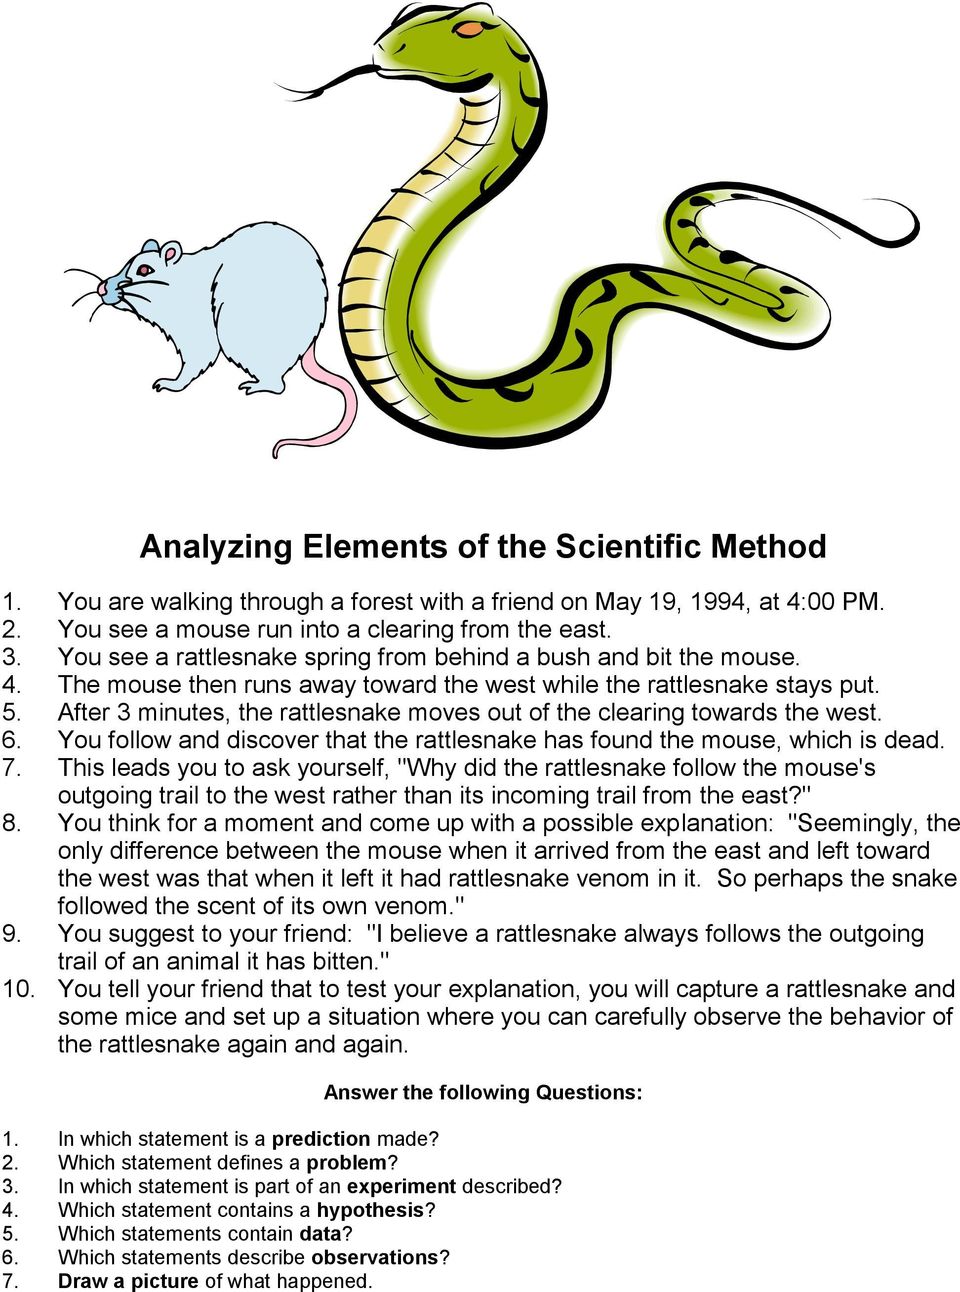 THE SCIENTIFIC METHOD - PDF Free Download With Regard To Scientific Method Story Worksheet Answers